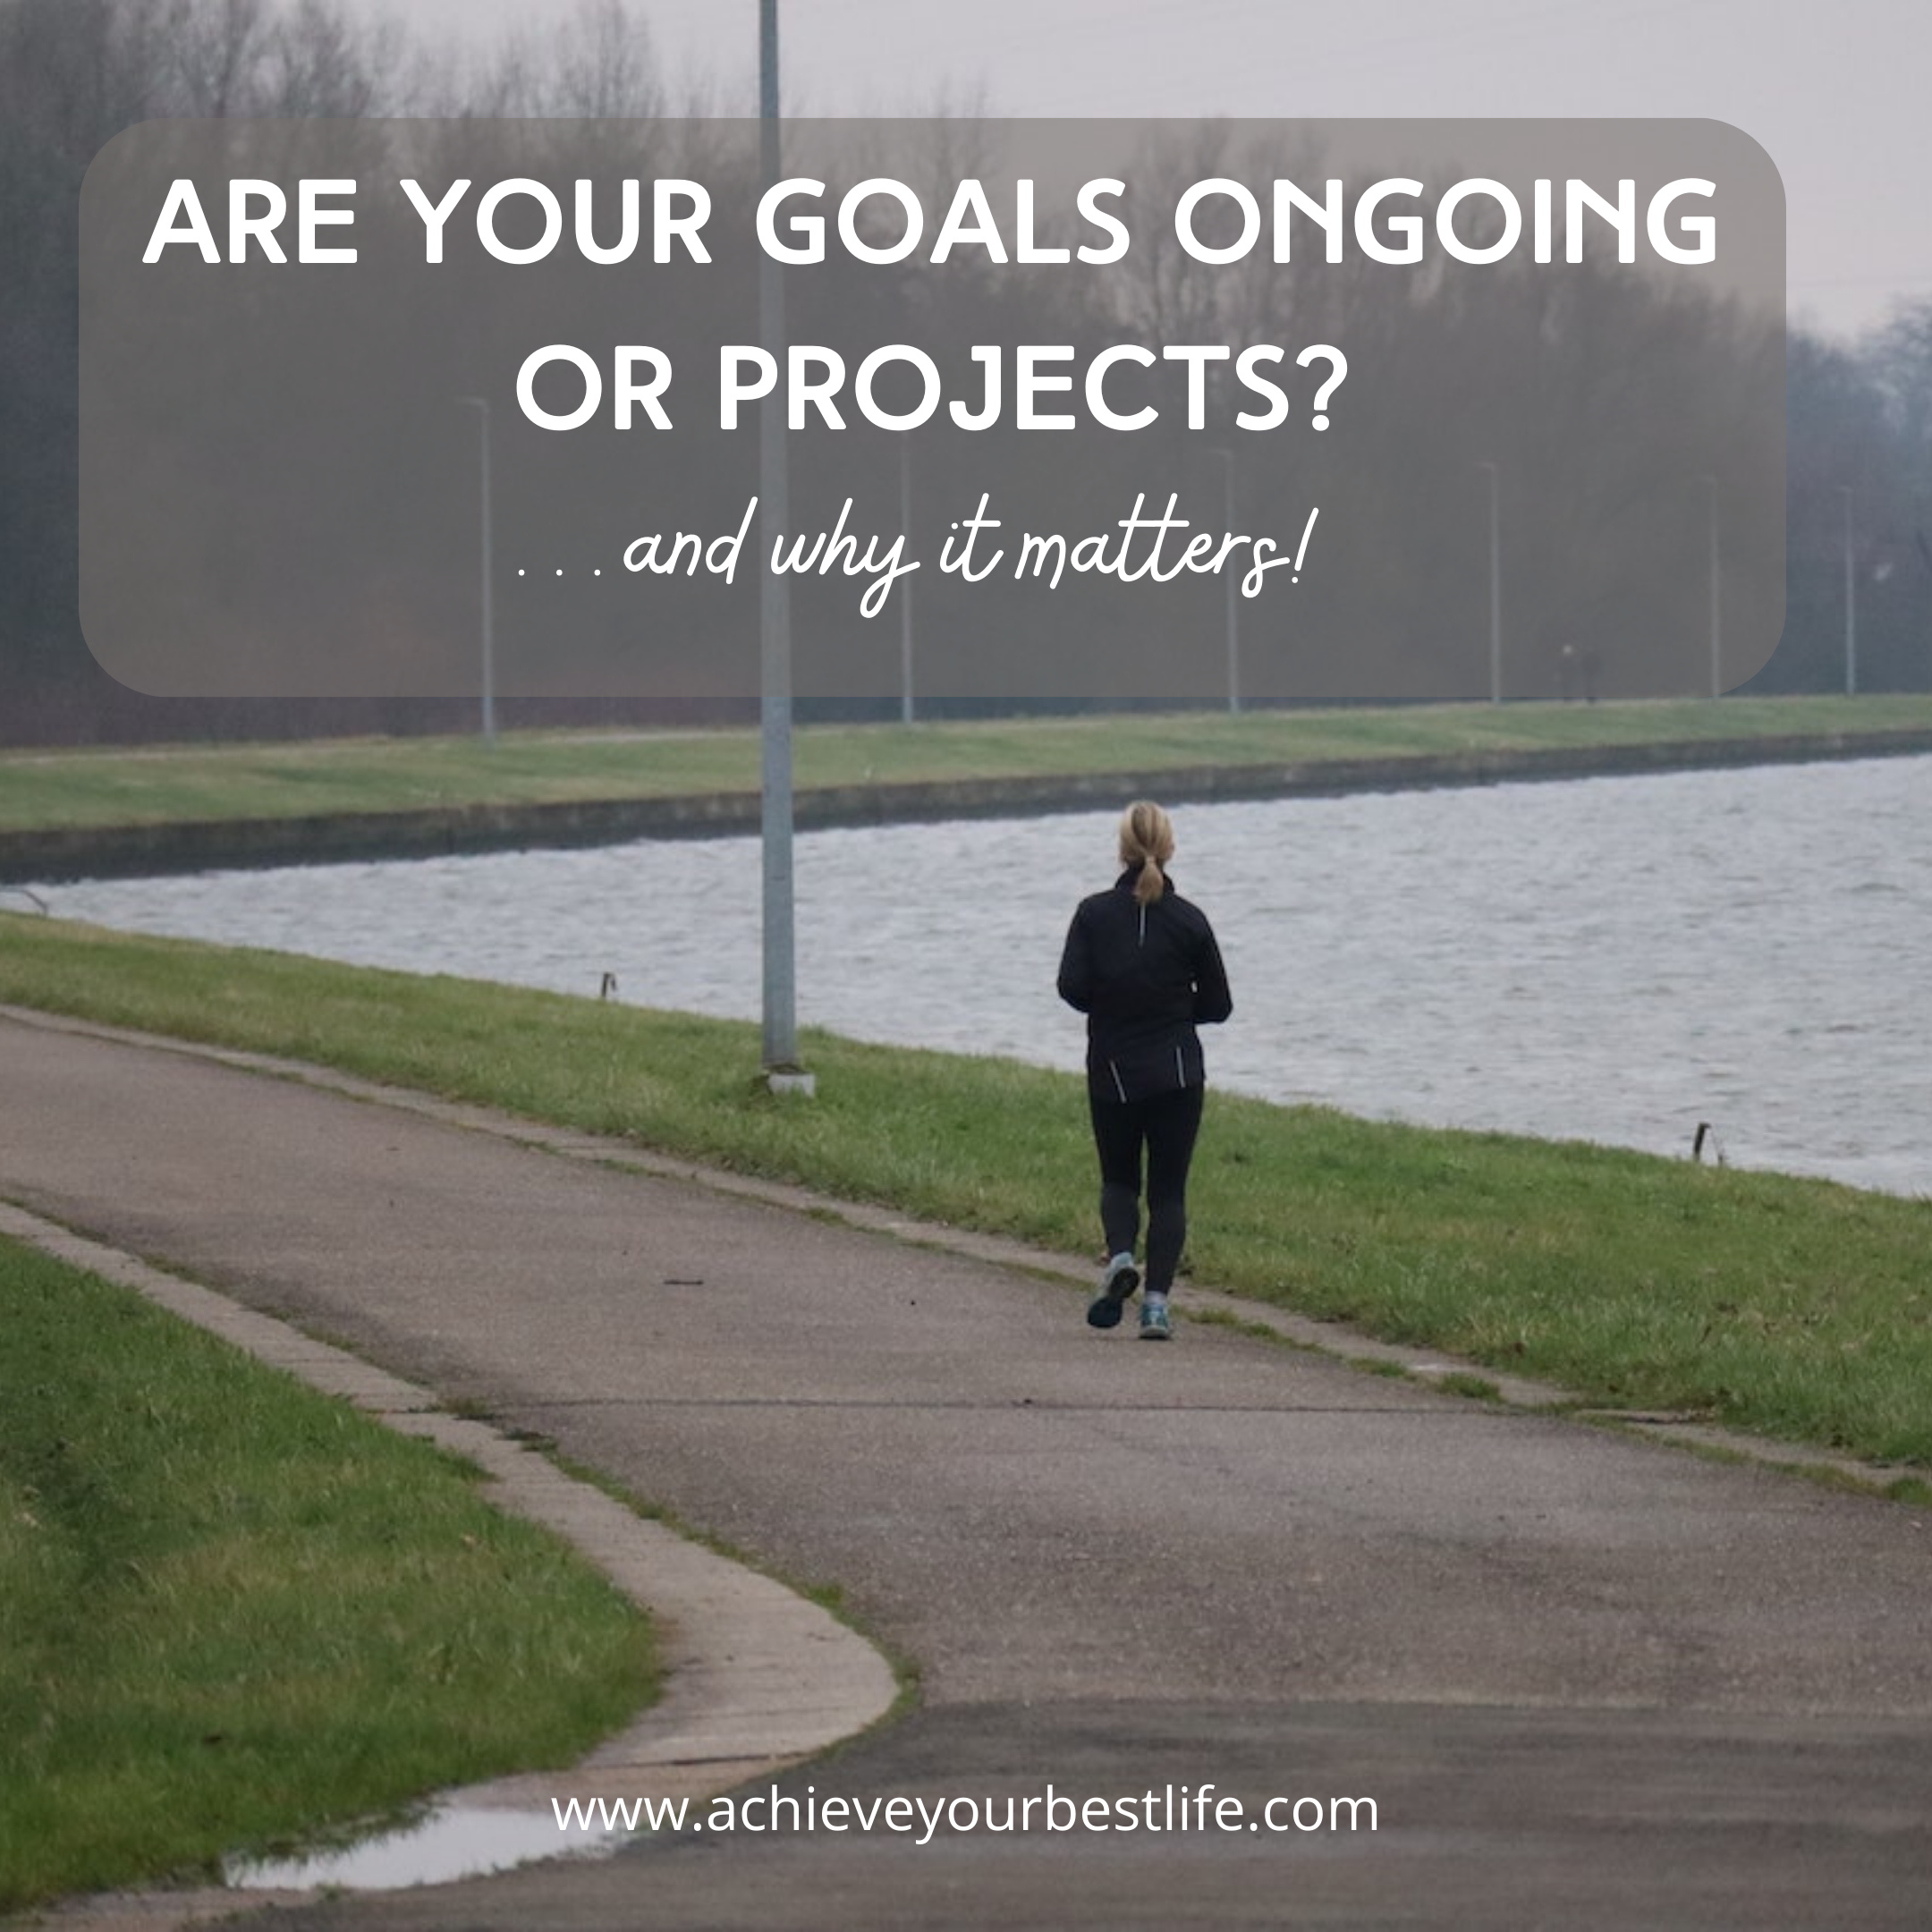 Are Your Goals Ongoing or Projects?